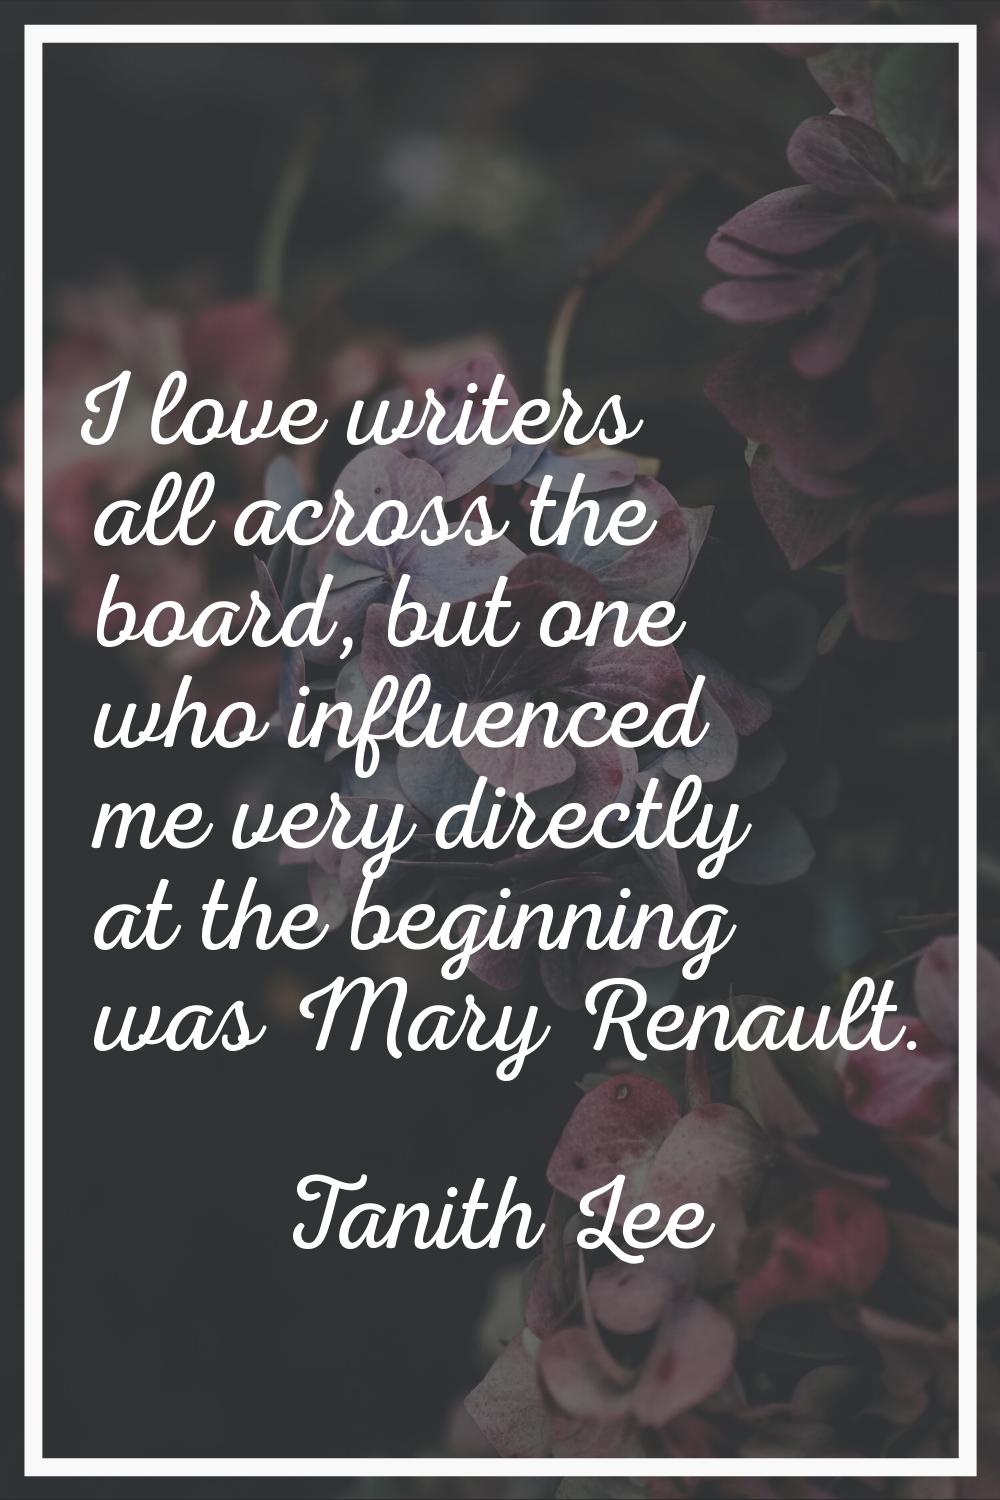 I love writers all across the board, but one who influenced me very directly at the beginning was M